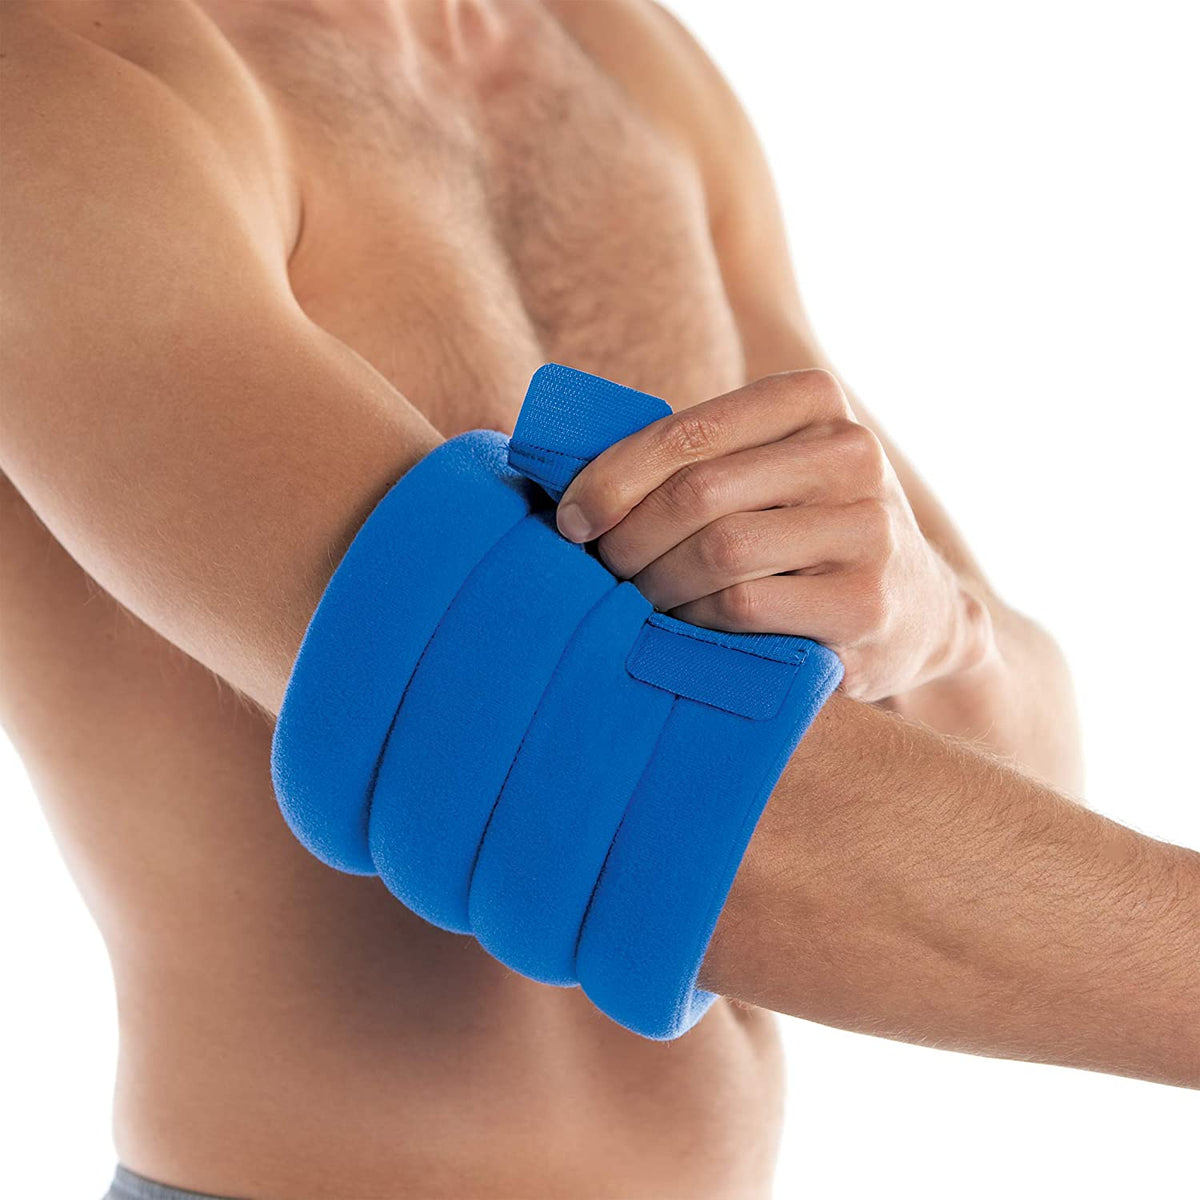 The Bed Buddy Joint Wrap on a male’s elbow